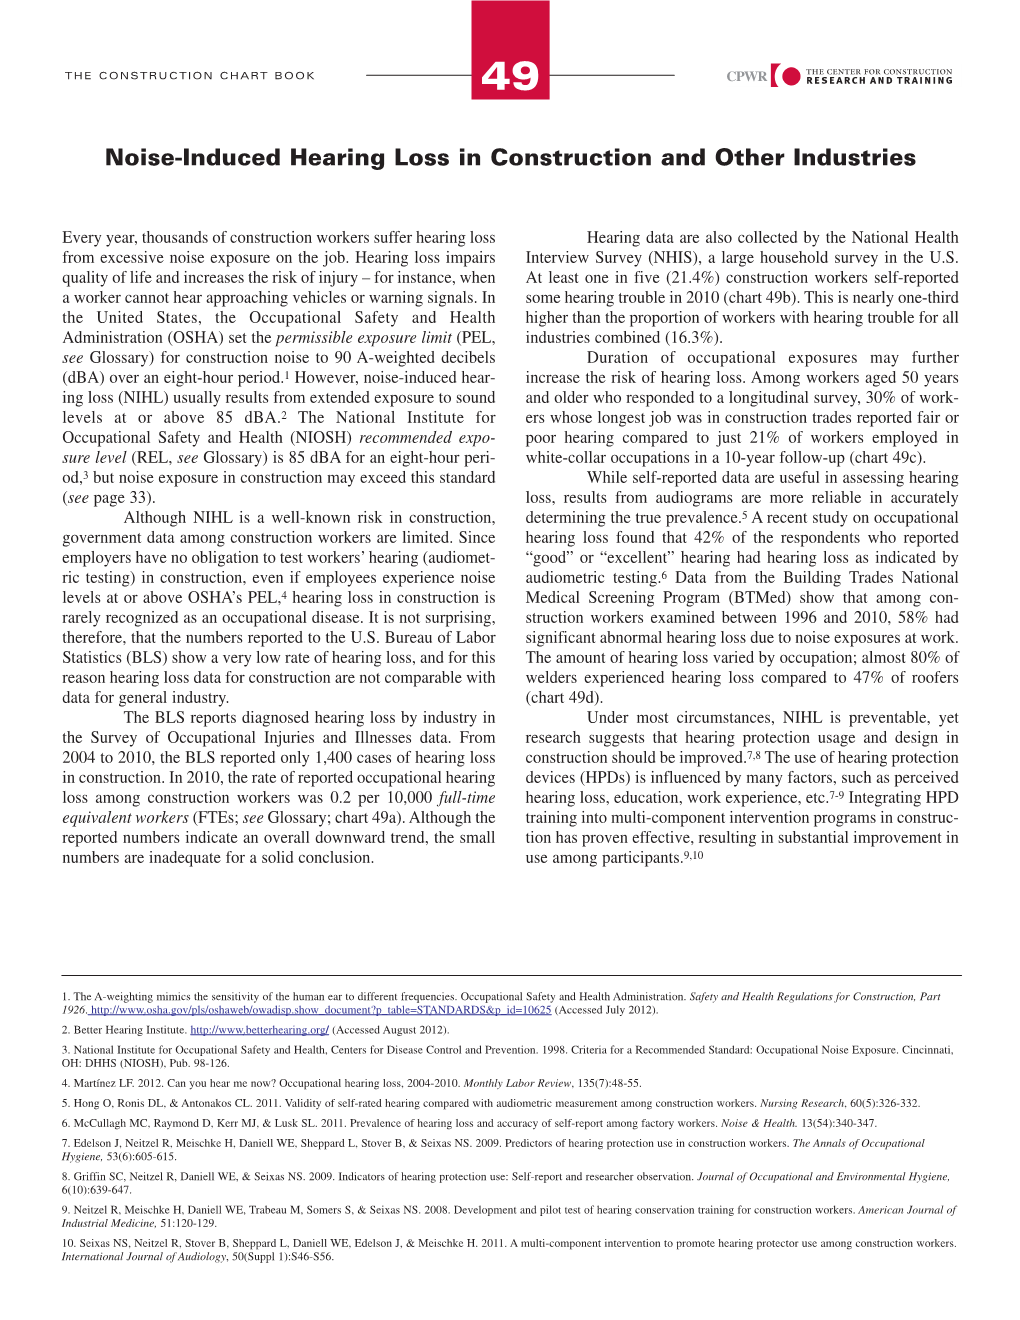 Noise-Induced Hearing Loss in Construction and Other Industries